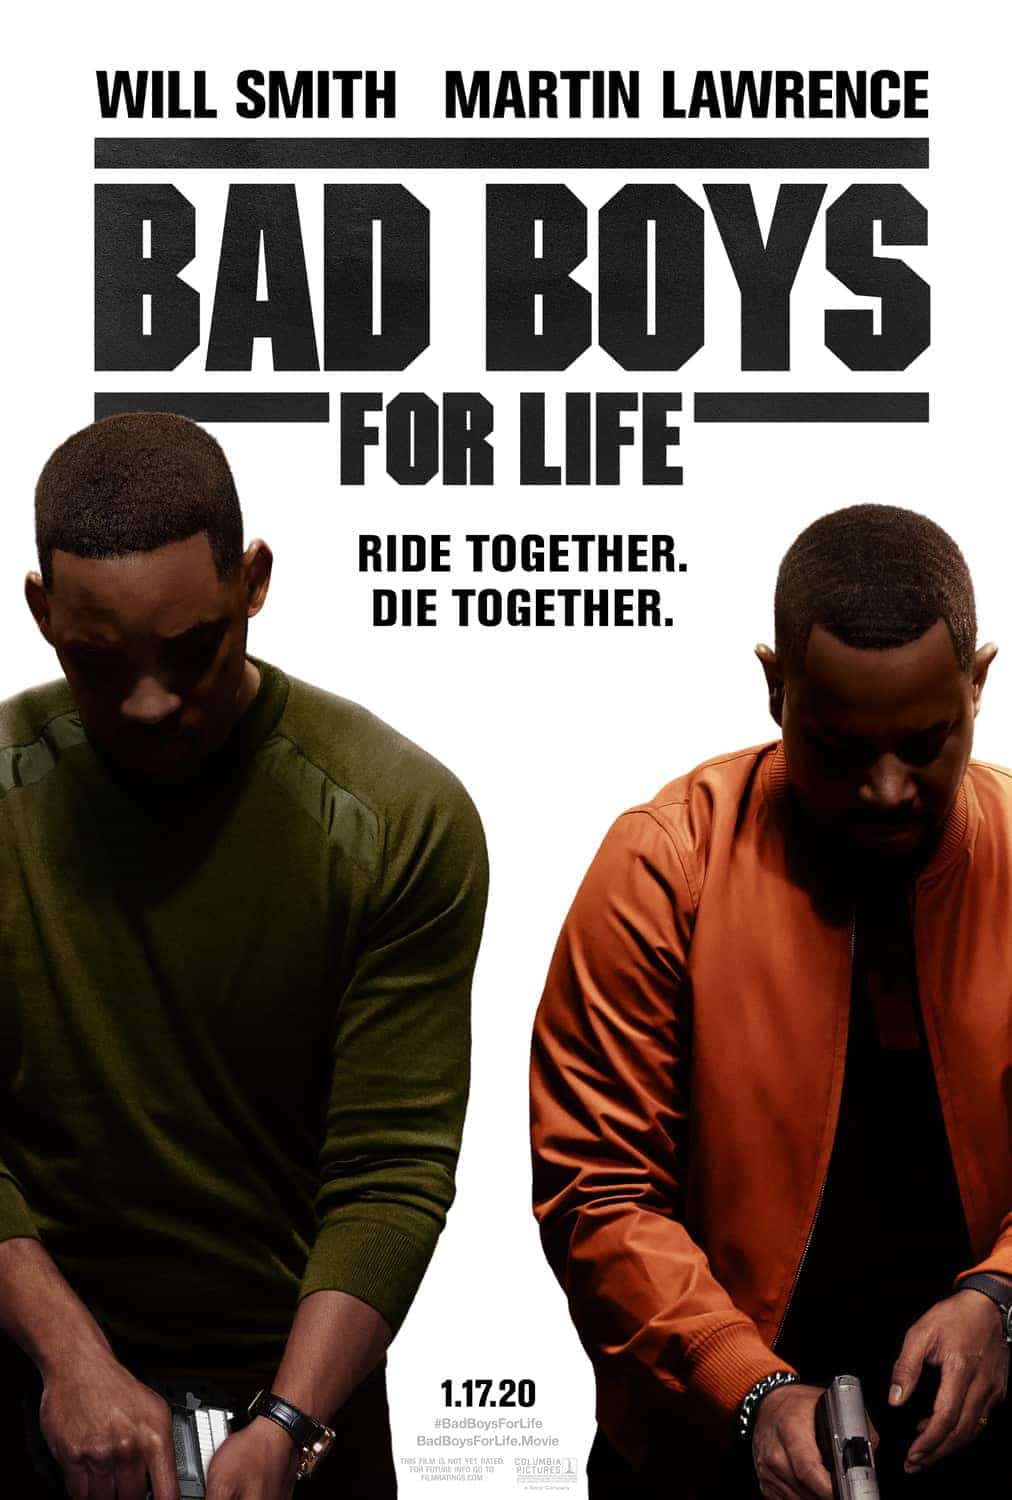 US Box Office Analysis 17 - 19 January 2020: Smith and Lawrence return to the top of the box office with sequel movie Bad Boys For Life